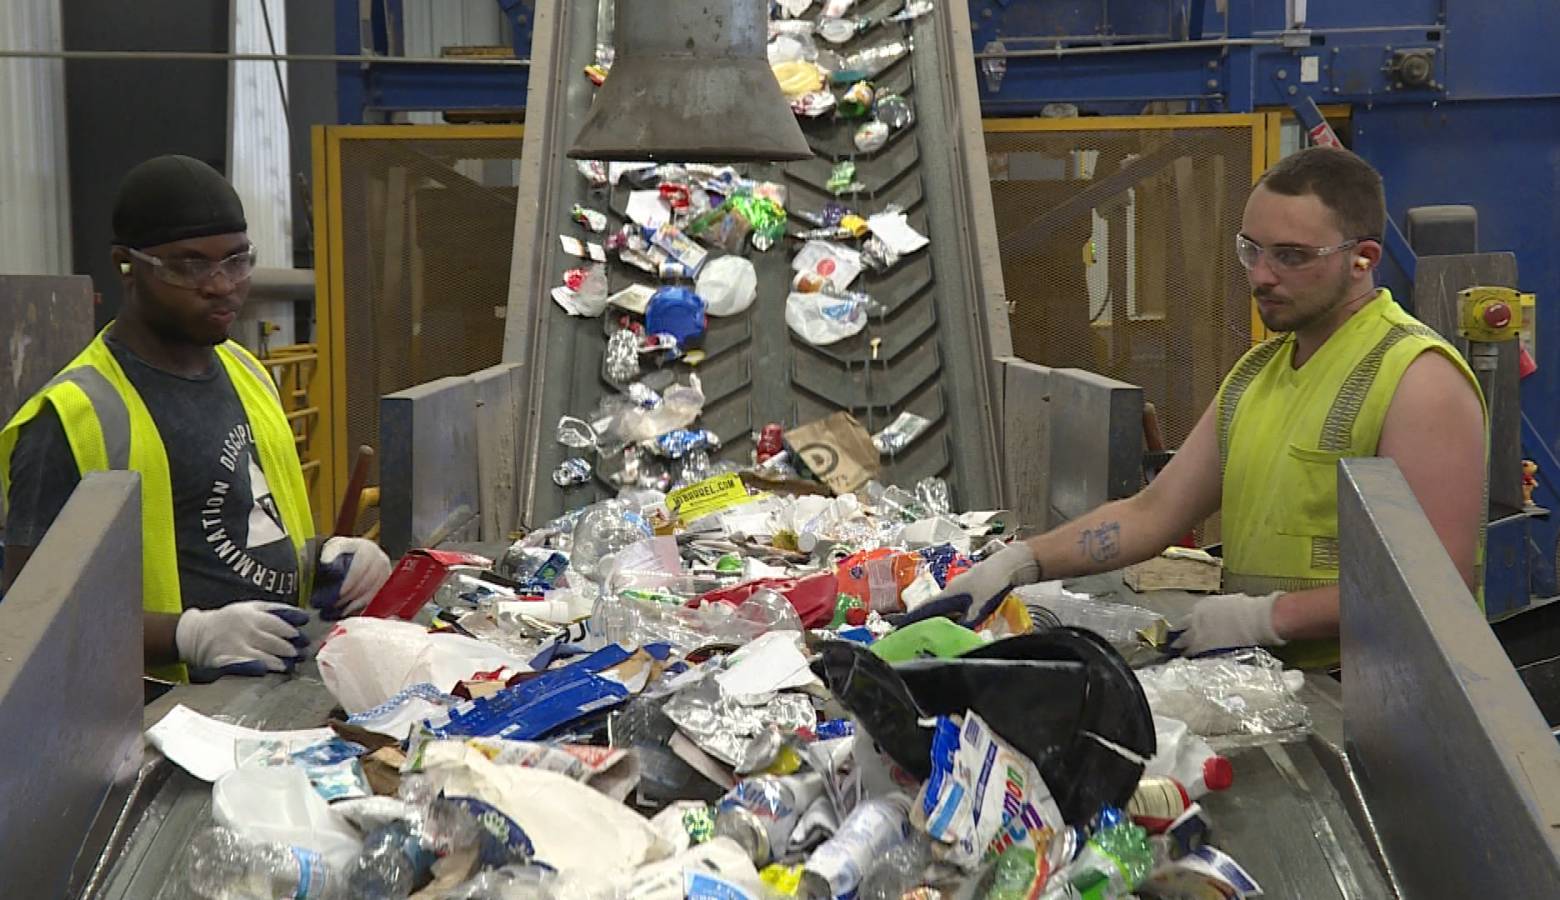 Workers sort recycling at Rumpke's material recovery facility in Cincinnati, Ohio (Zach Herndon/Indiana Public Media)